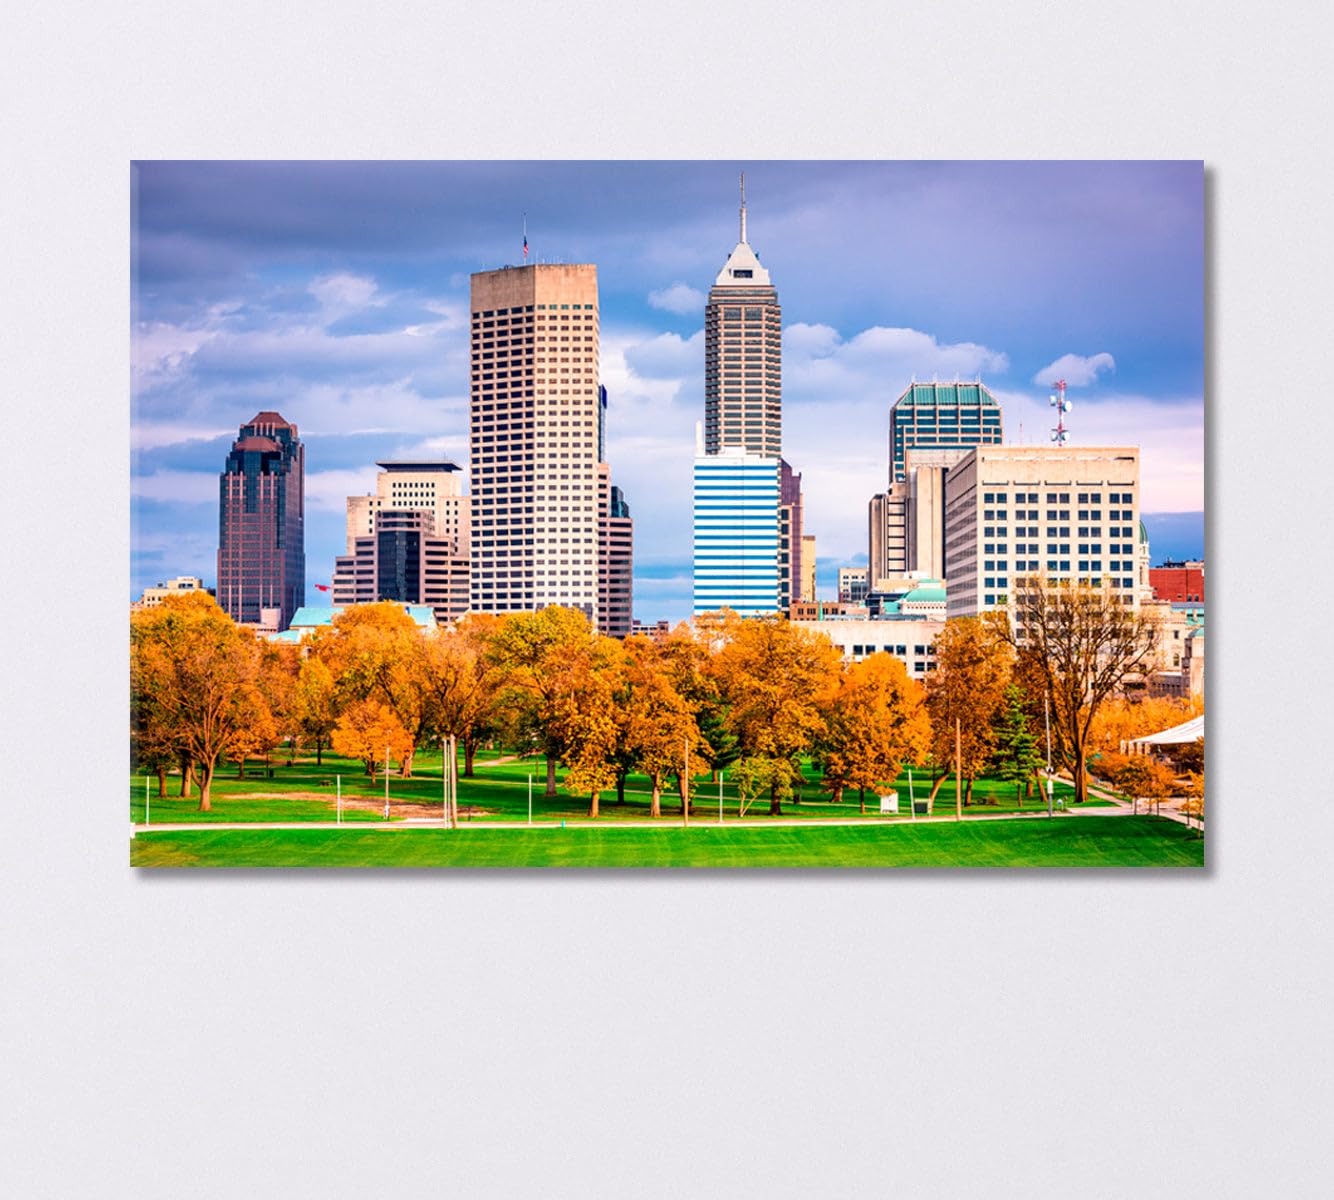 Autumn in Indiana USA Canvas Print 1 Panel / 36x24 inches